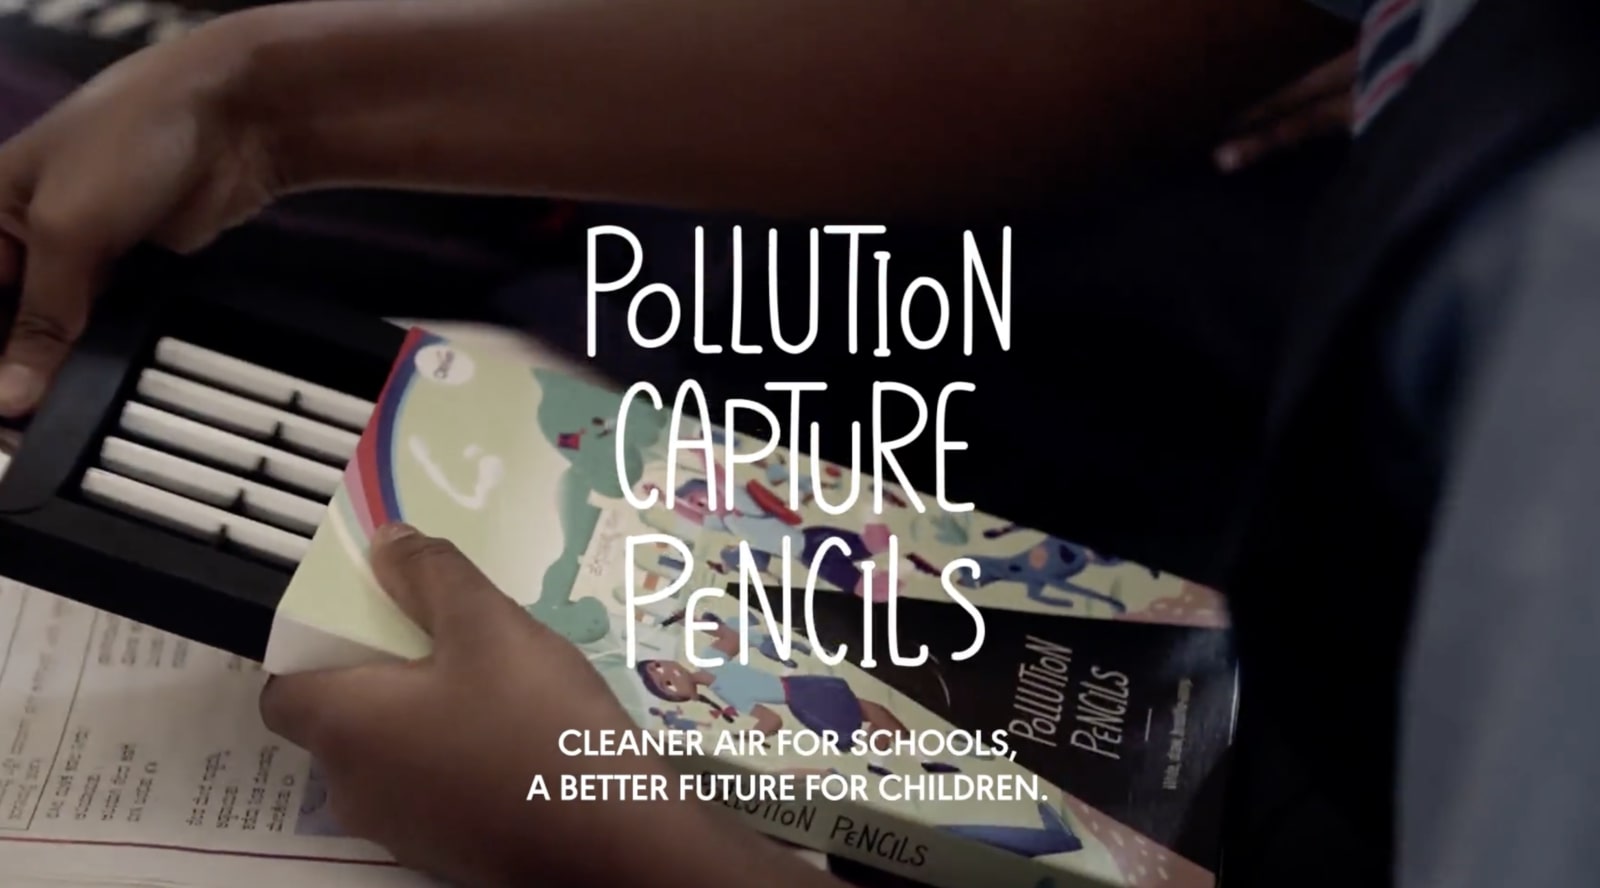 Pollution Capture Pencils, Otrivin, Campaigns of the world